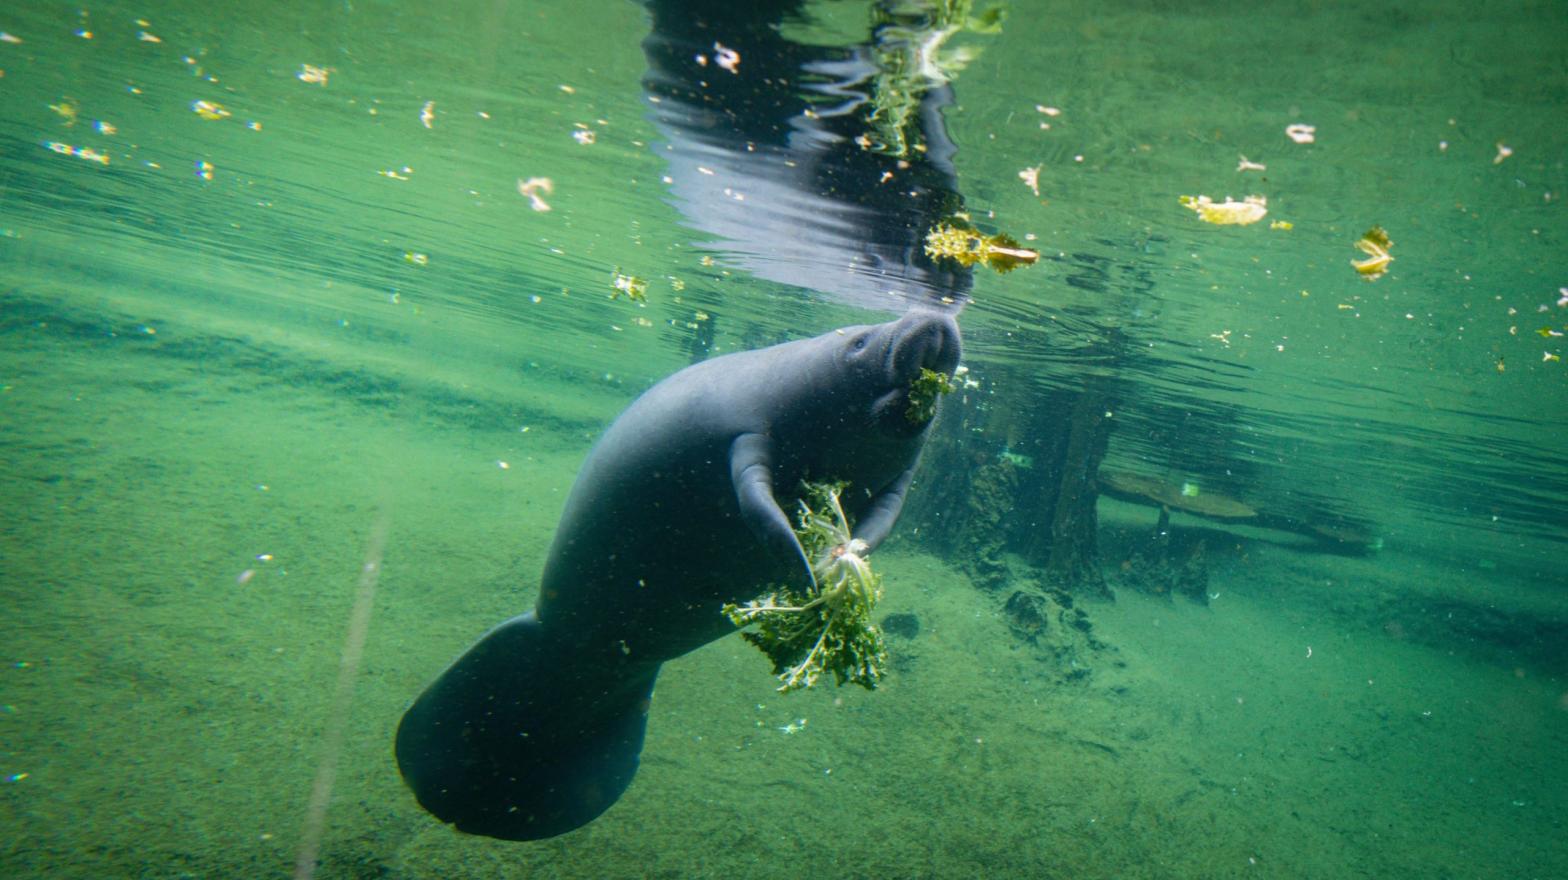 A manatee recovering at a critical care centre in ZooTampa at Lowry Park in Tampa, Florida, in January 2021. (Photo: Eva Marie Uzcategui / AFP, Getty Images)